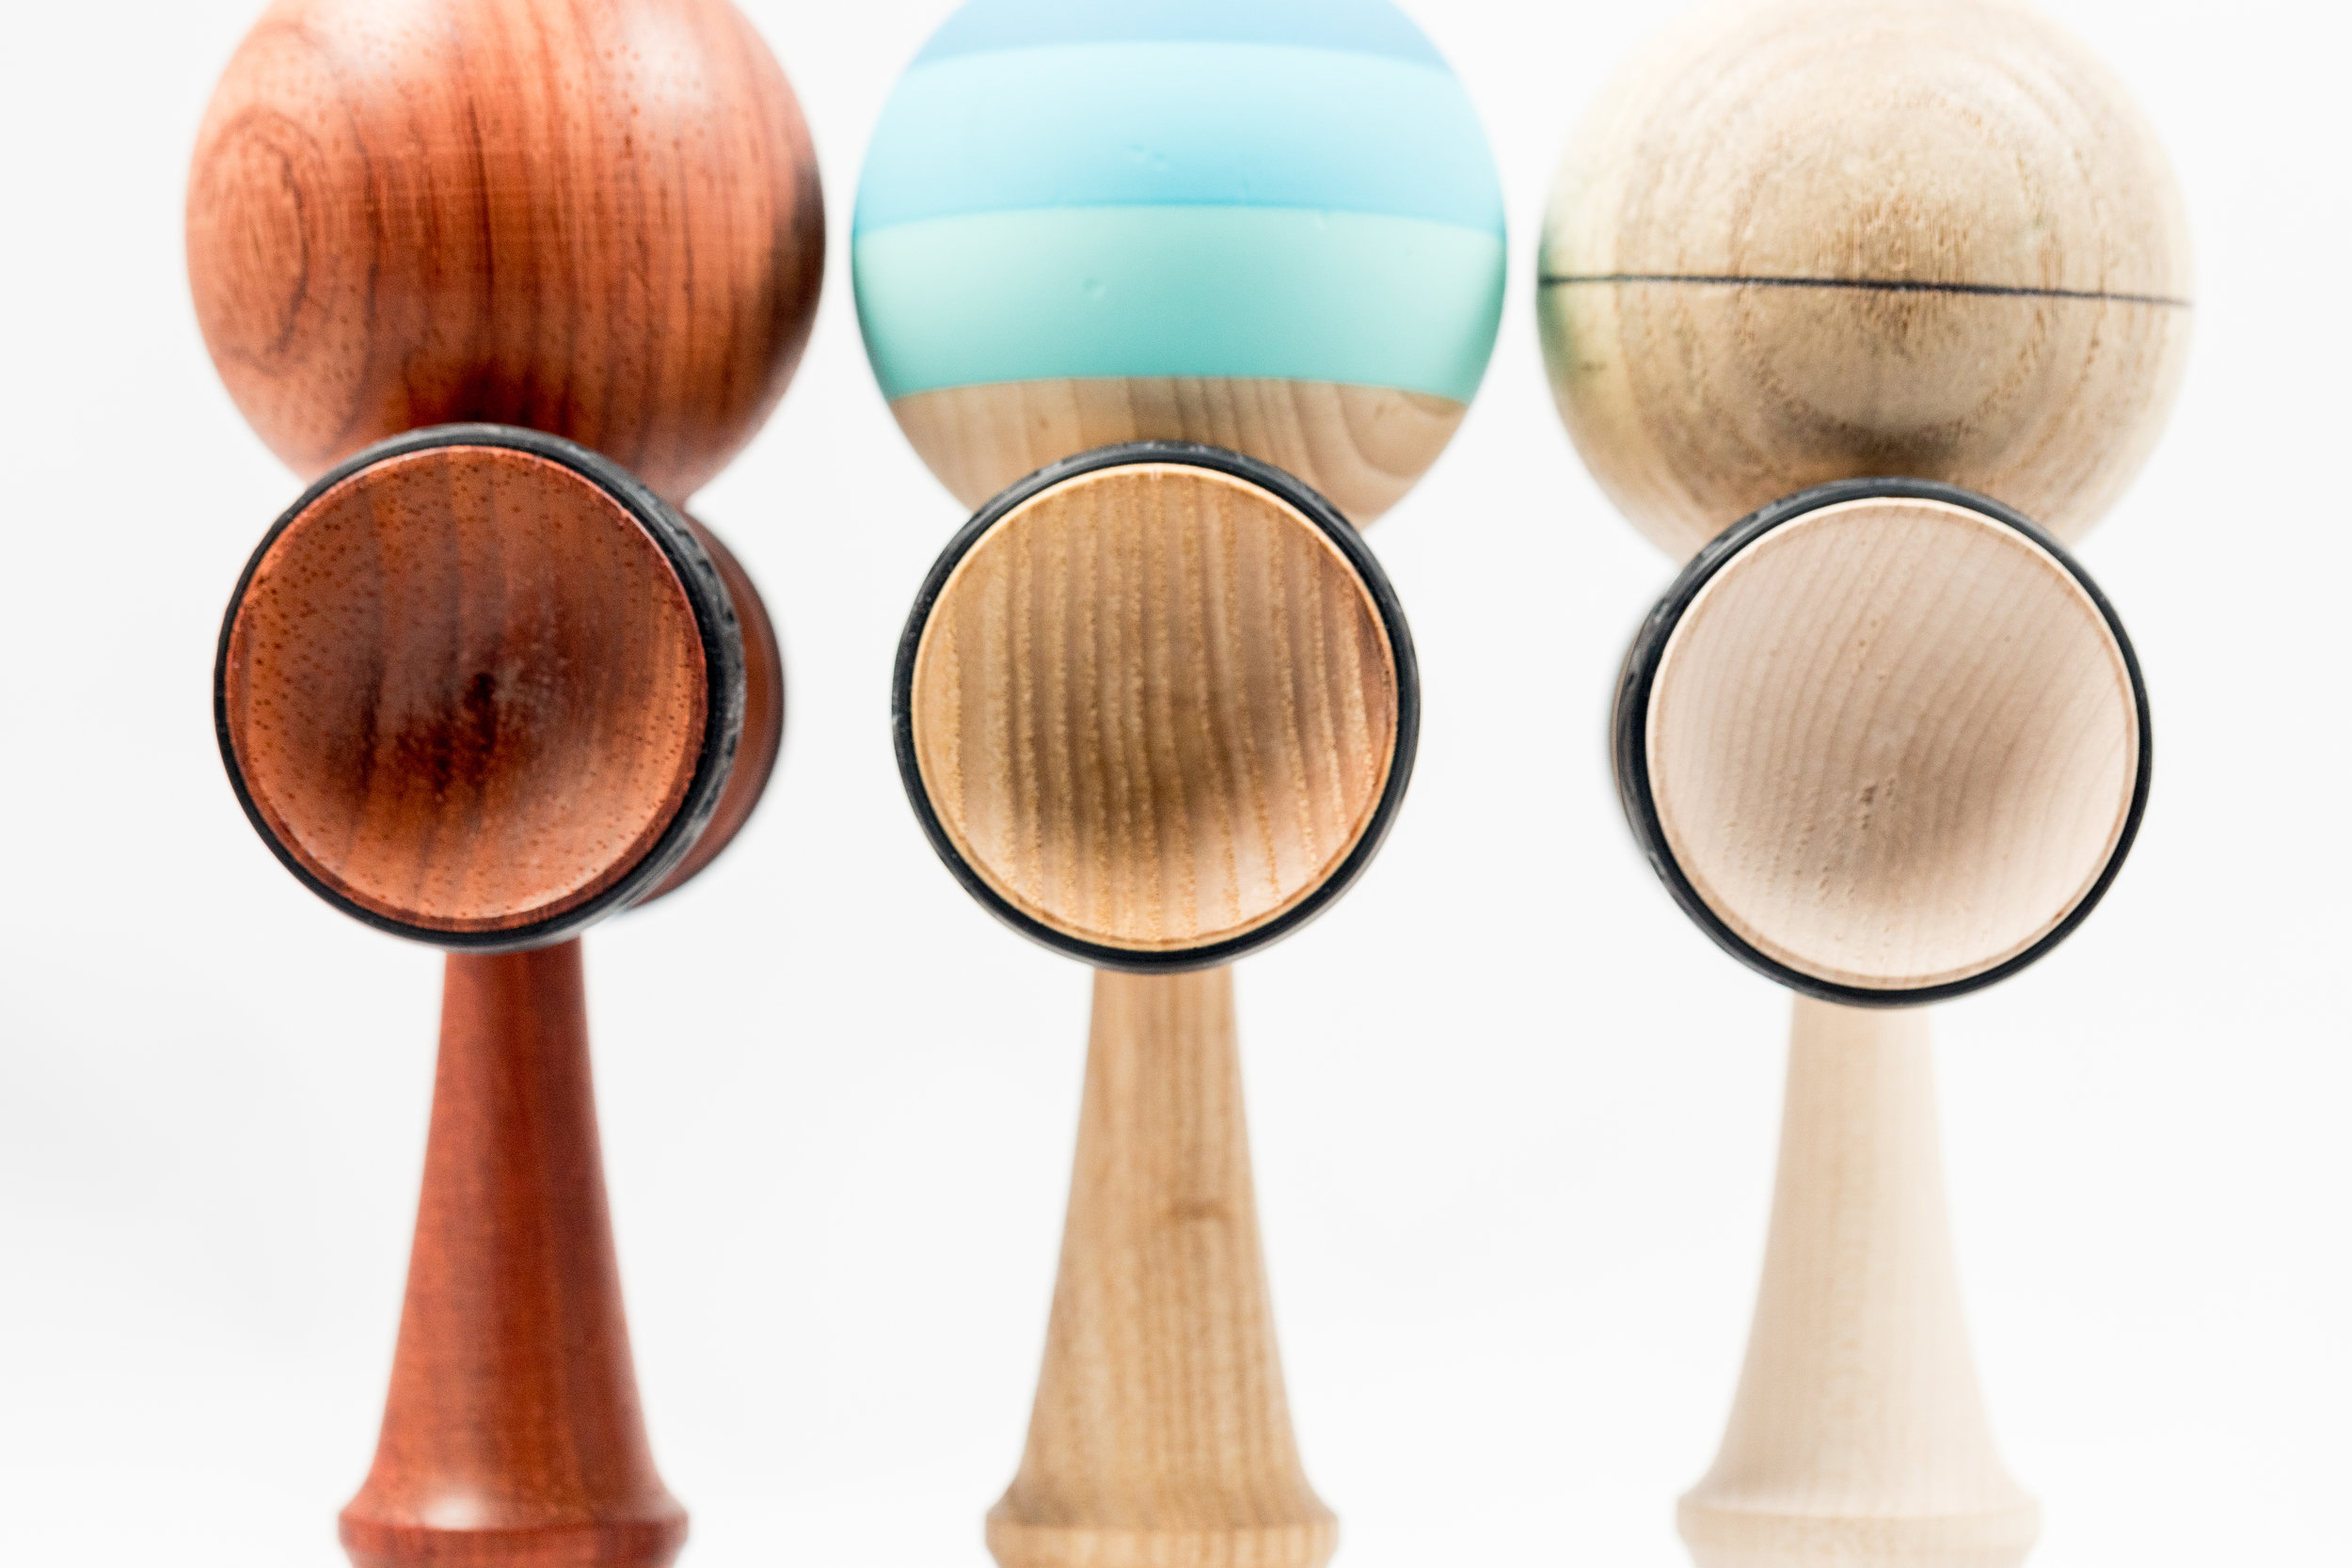 kendama-accessories-band-weight-lunars-learn